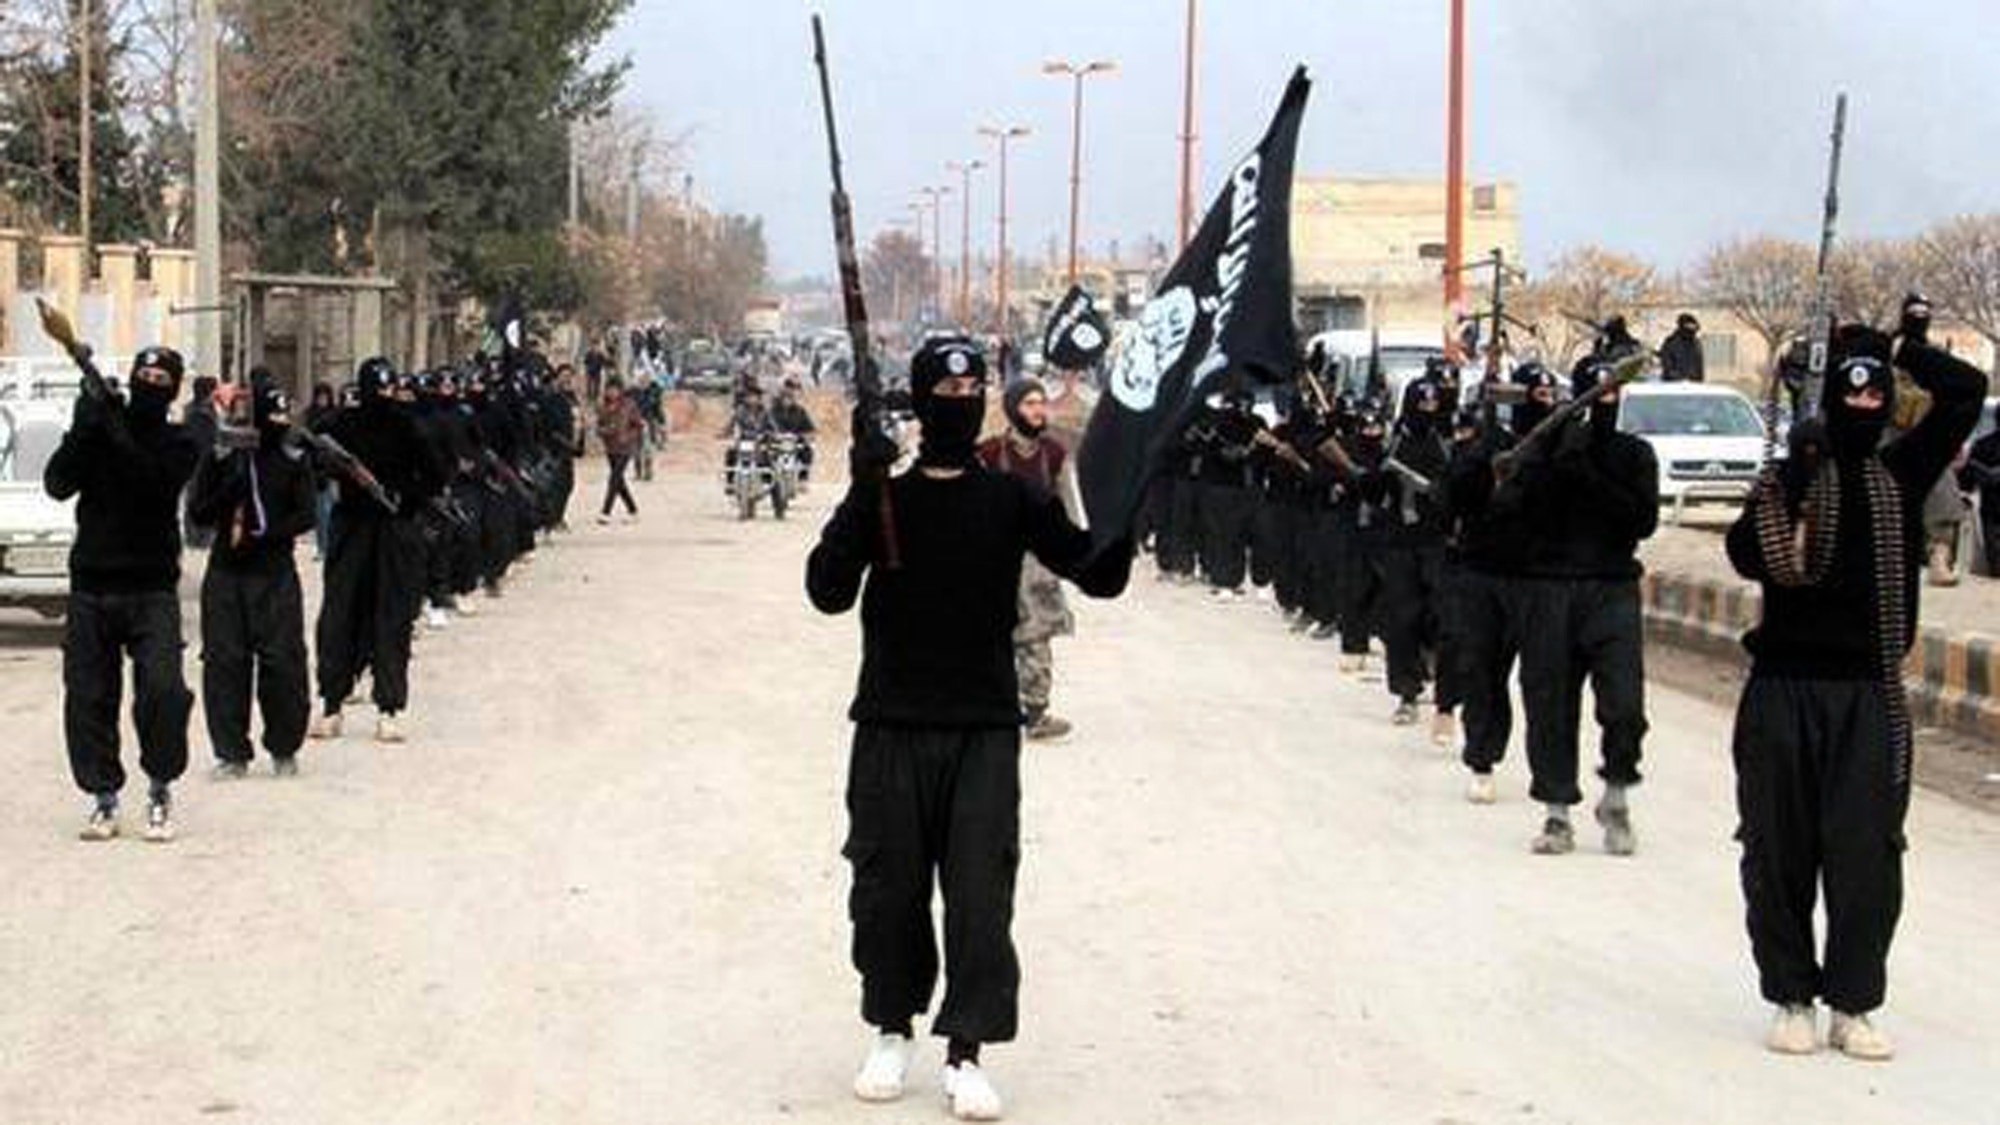 Al Qaeda announces it's breaking ties with militant group fighting in Syria